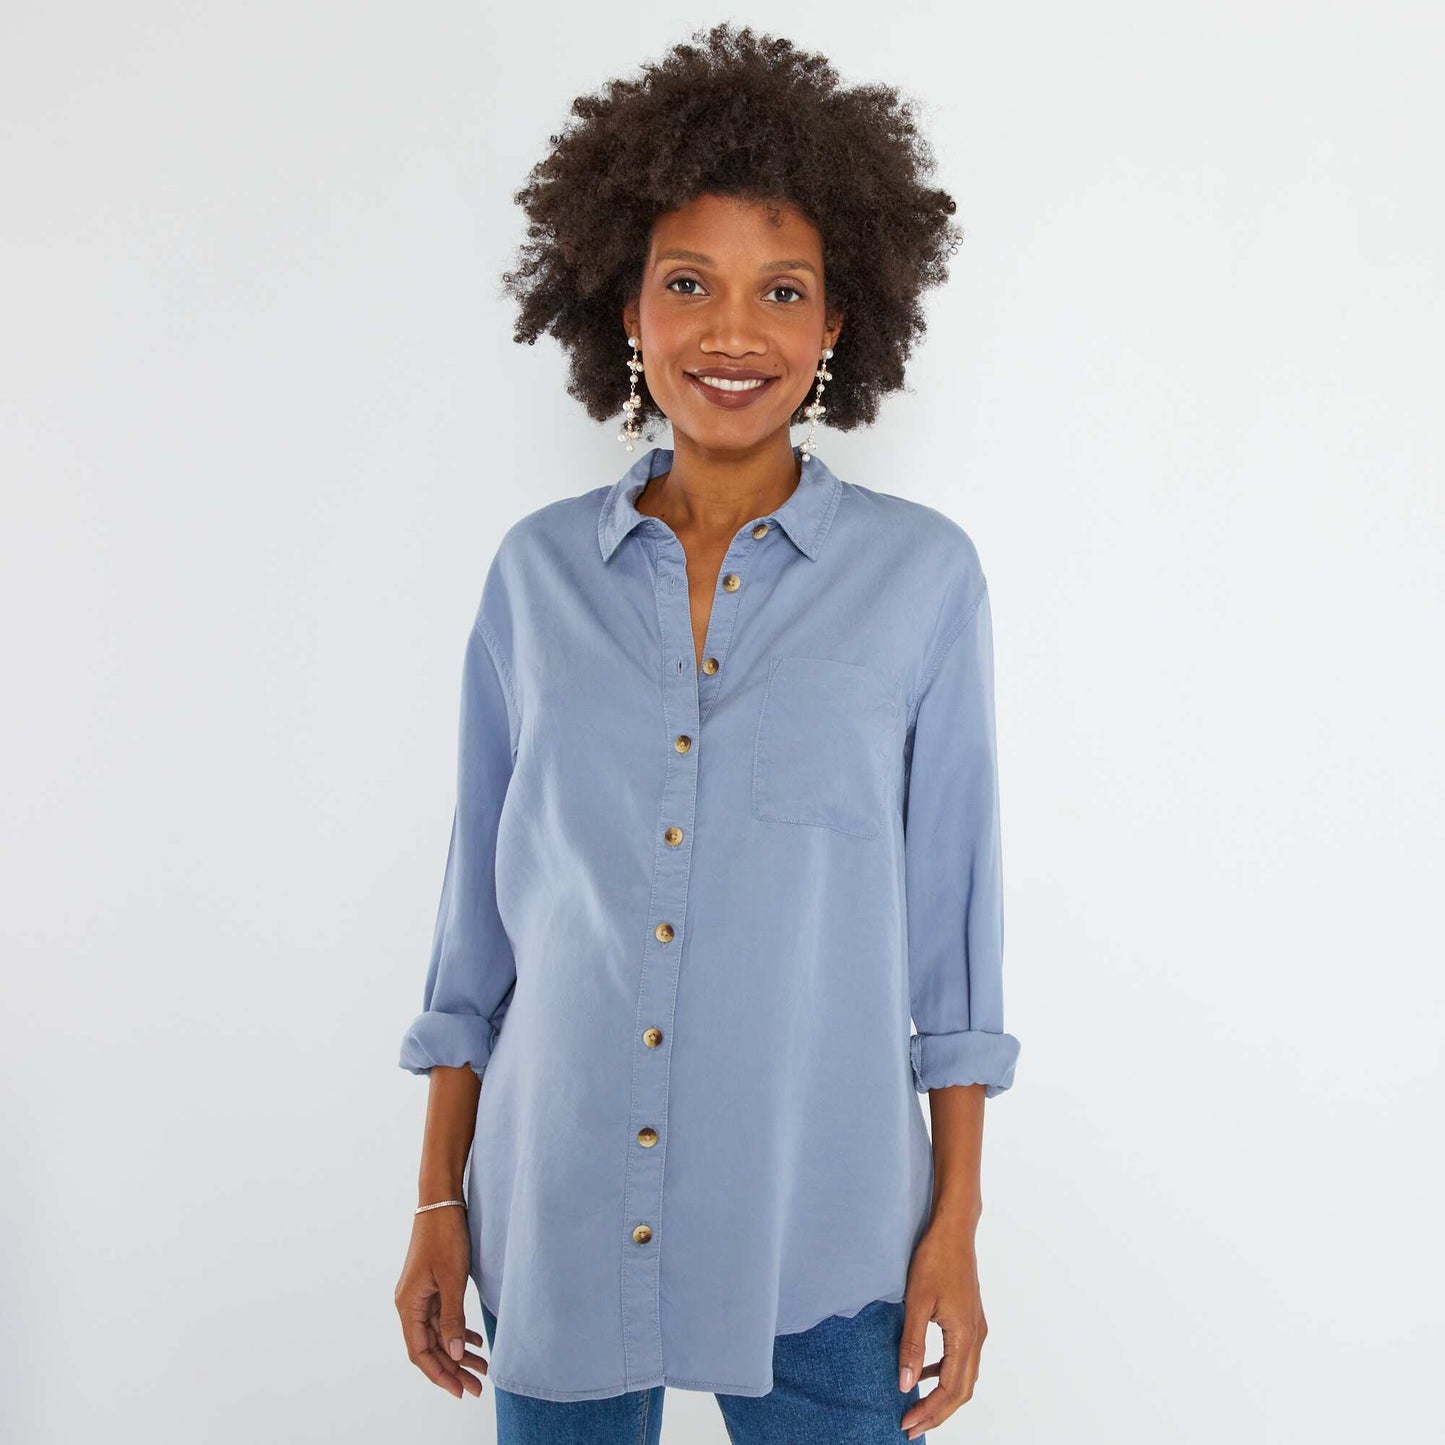 Light and flowing maternity shirt stone blue